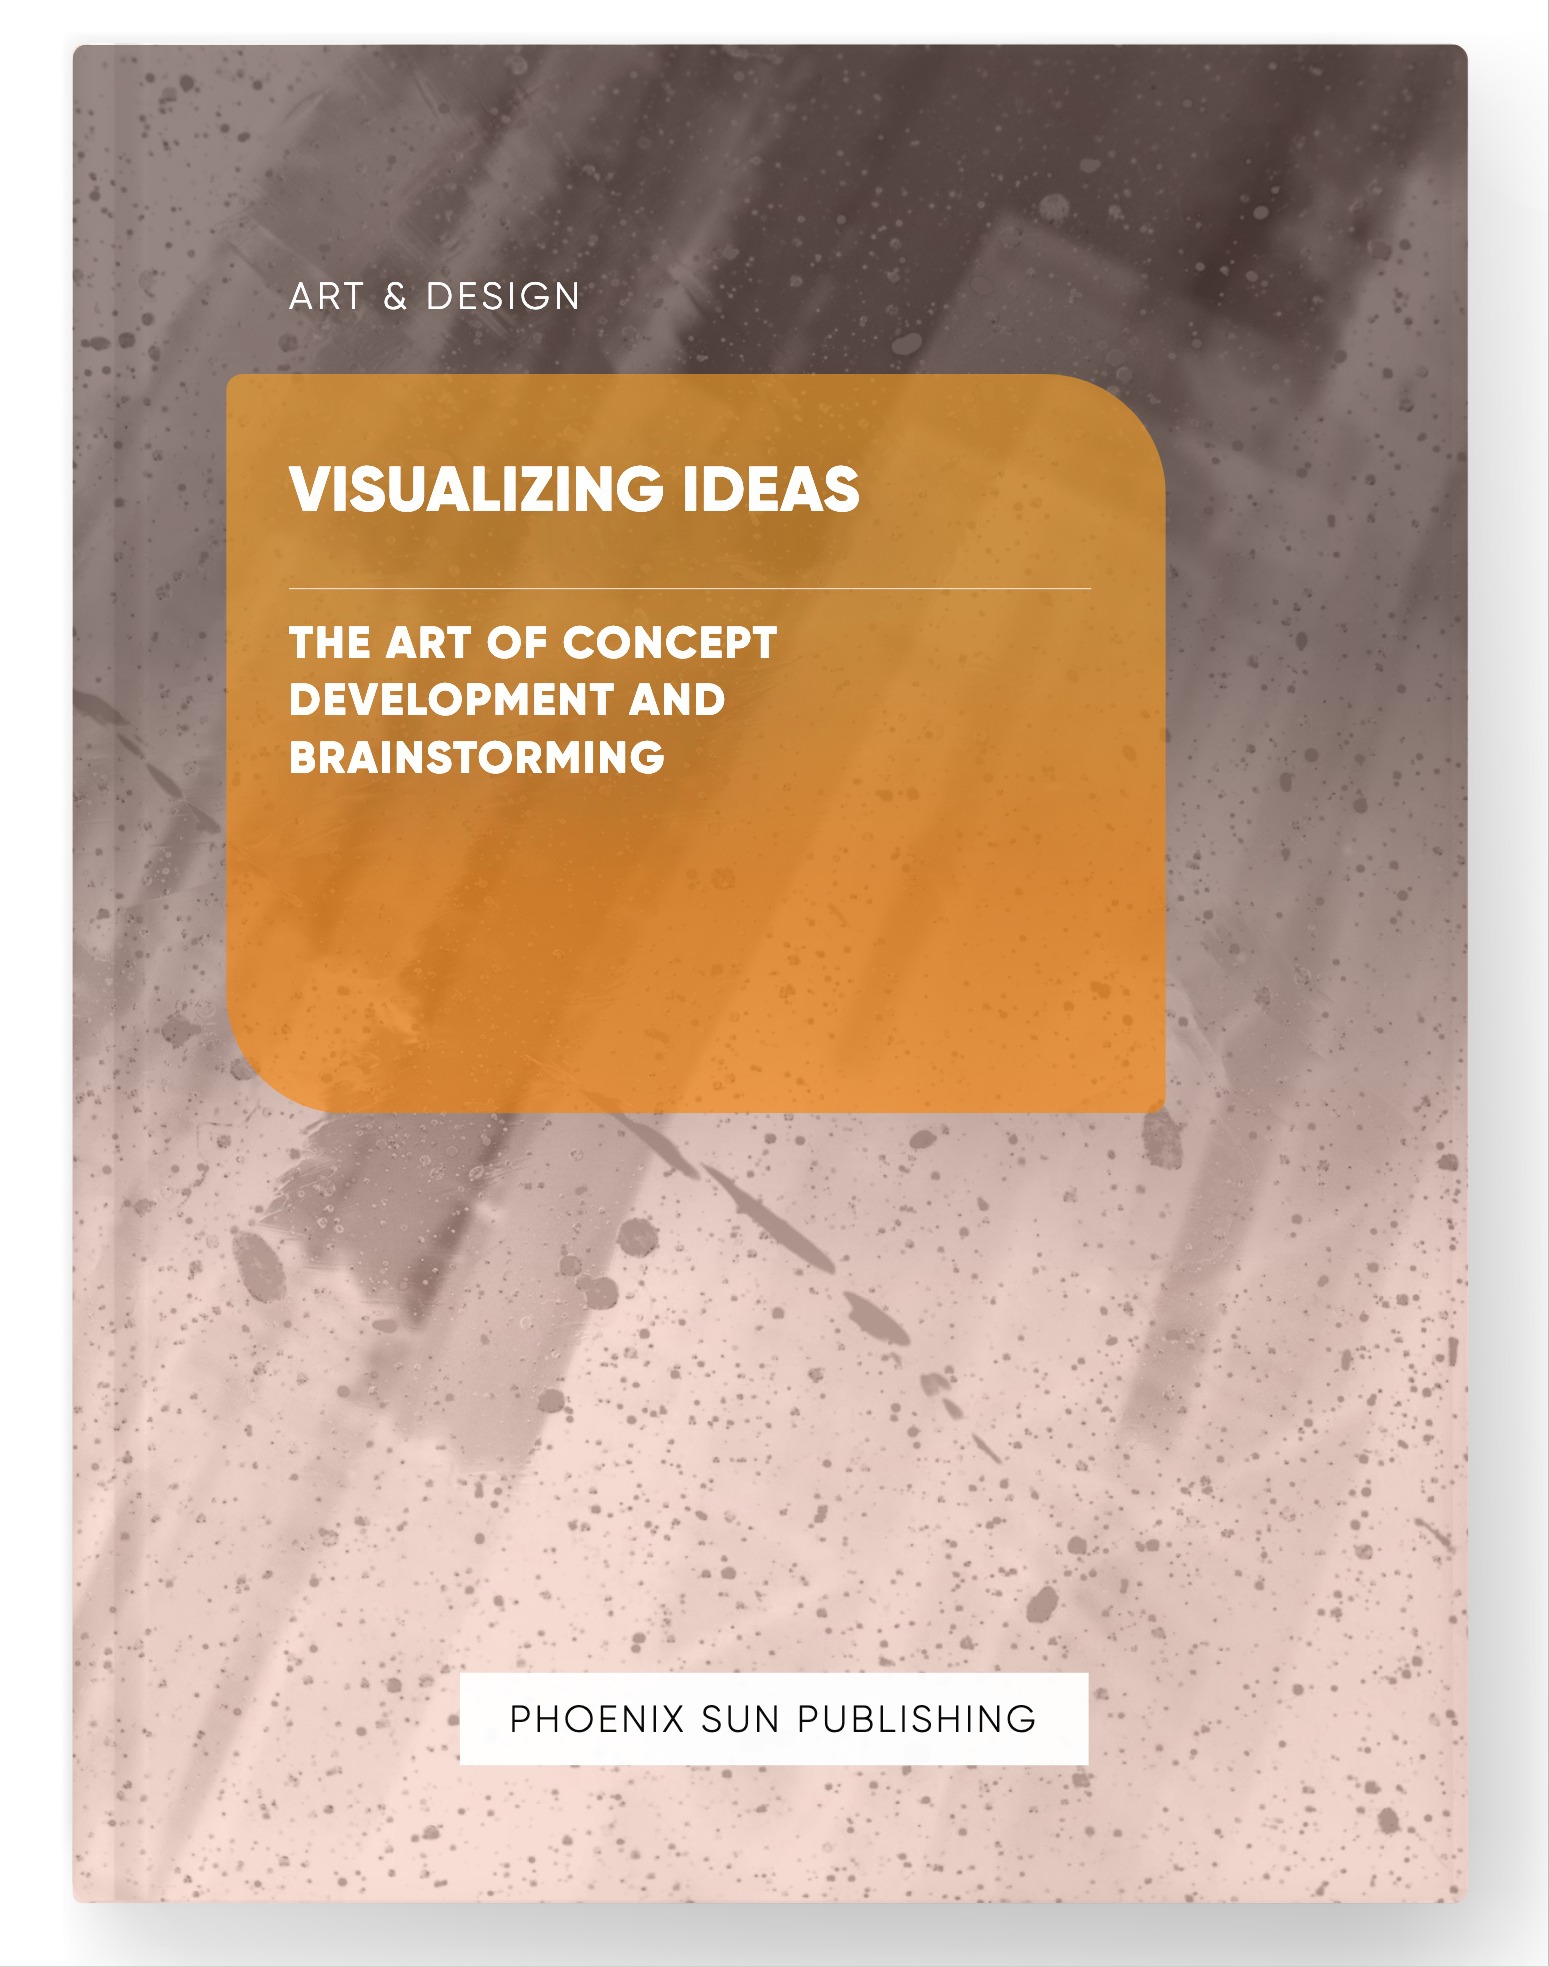 Visualizing Ideas – The Art of Concept Development and Brainstorming